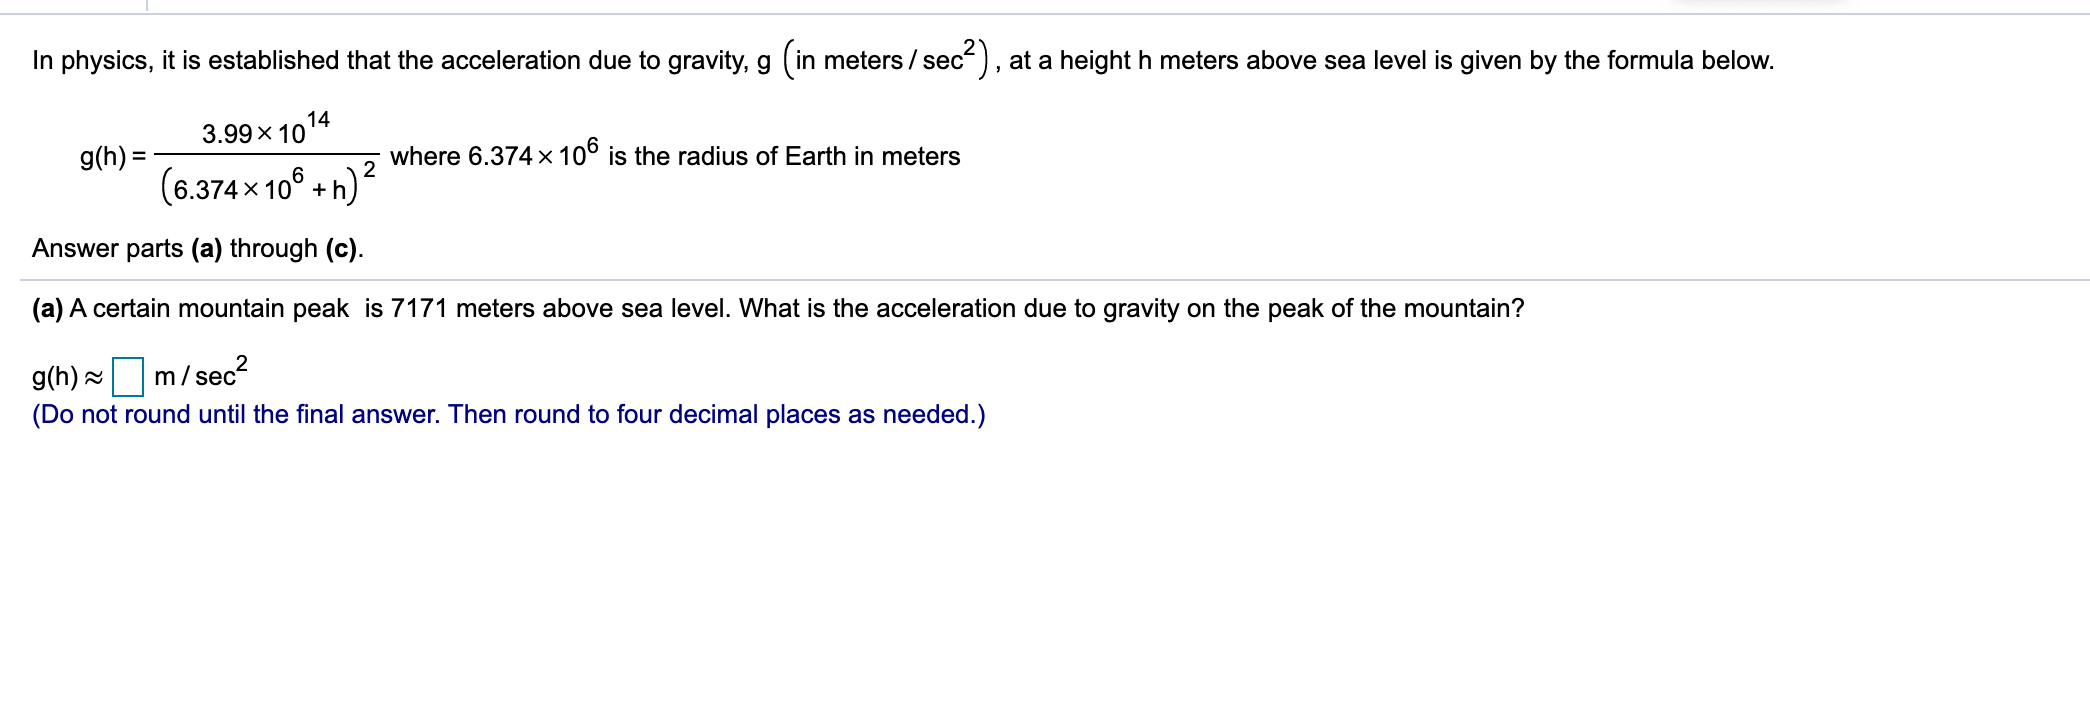 In physics, it is established that the acceleration due to gravity, g (in meters / sec), at a height h meters above sea level is given by the formula below.
3.99 x 1014
g(h) =
(6.374 x 10° +h)
where 6.374 x 10° is the radius of Earth in meters
2
Answer parts (a) through (c).
(a) A certain mountain peak is 7171 meters above sea level. What is the acceleration due to gravity on the peak of the mountain?
g(h) =
m/sec?
(Do not round until the final answer. Then round to four decimal places as needed.)
